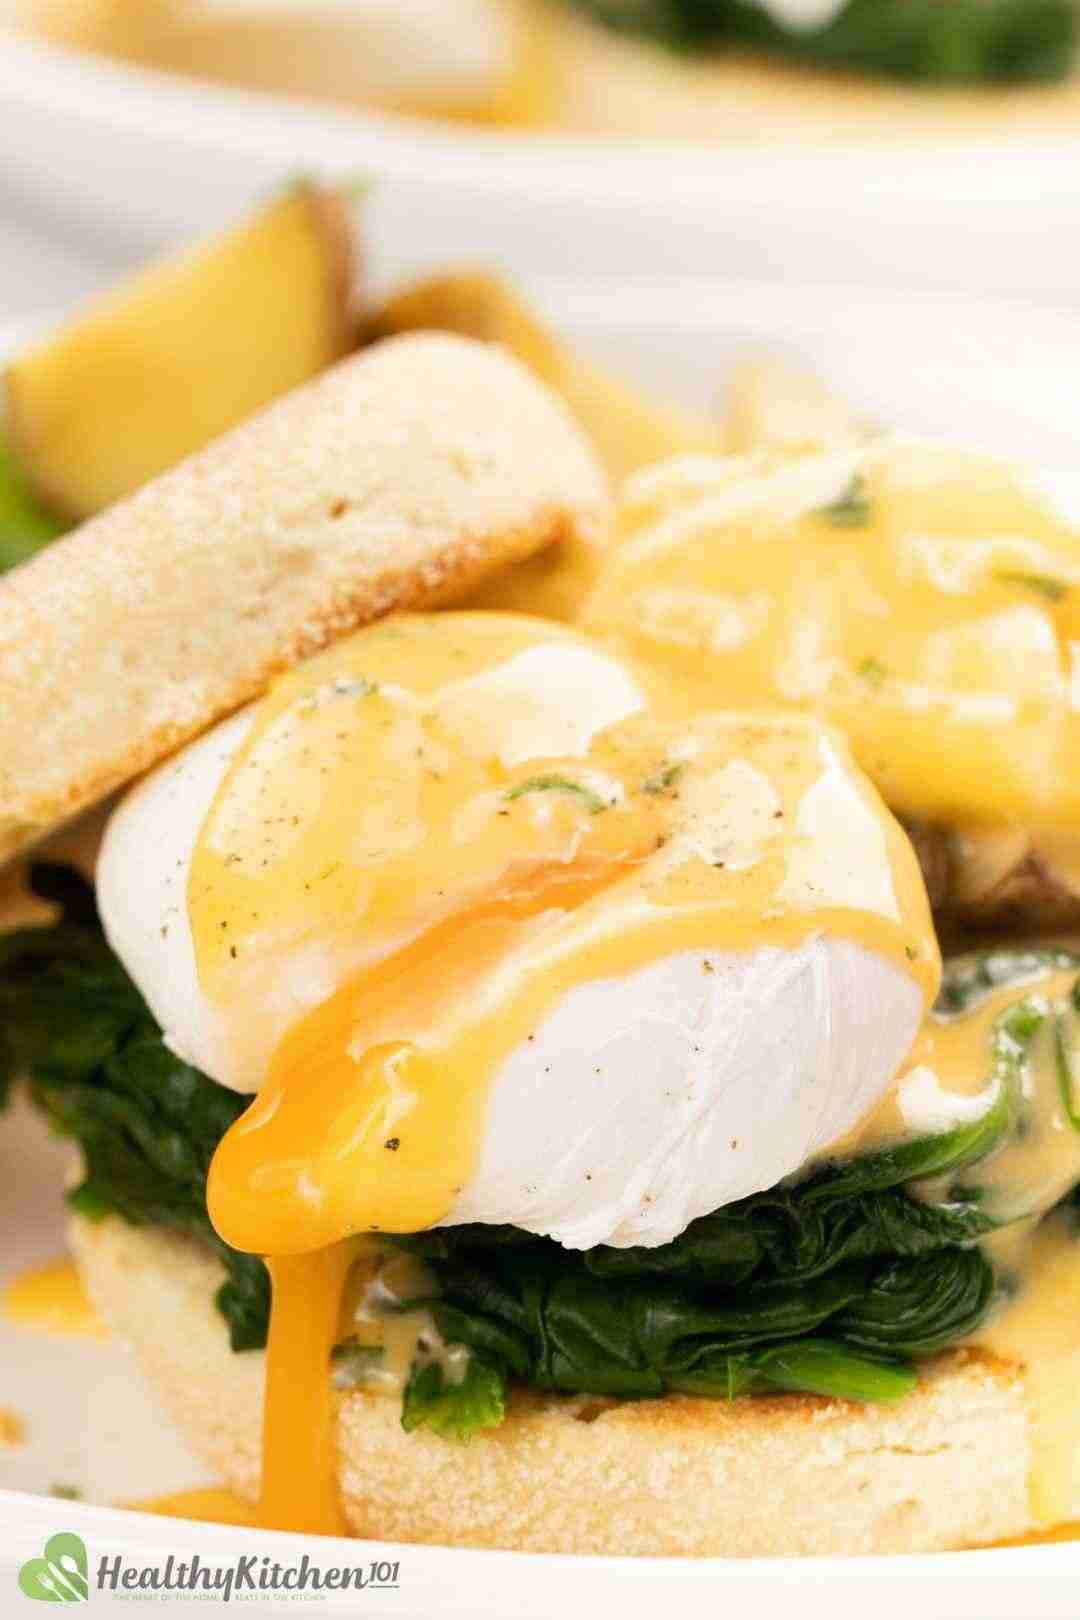 Eggs Benedict Recipe - A Healthy Take on America’s Favorite Brunch